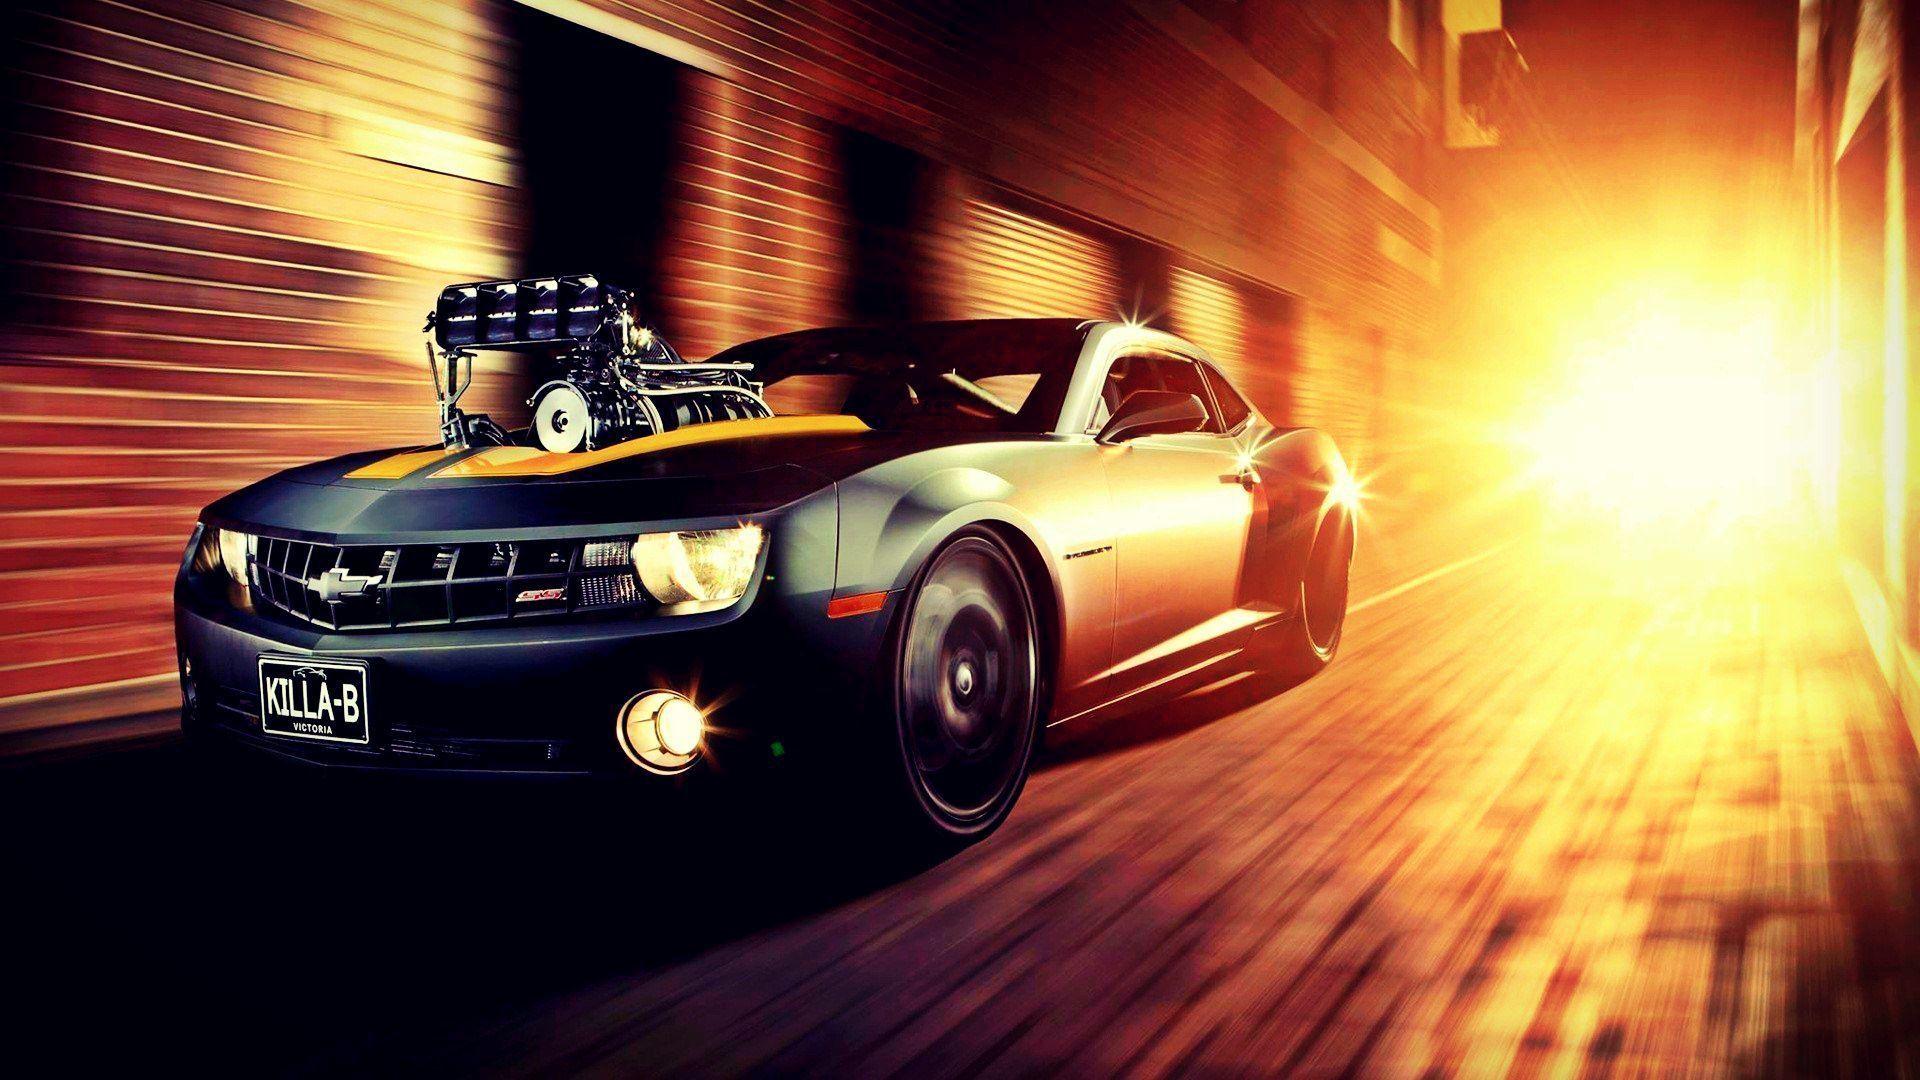 Cool Car Backgrounds Wallpapers Wallpaper Cave